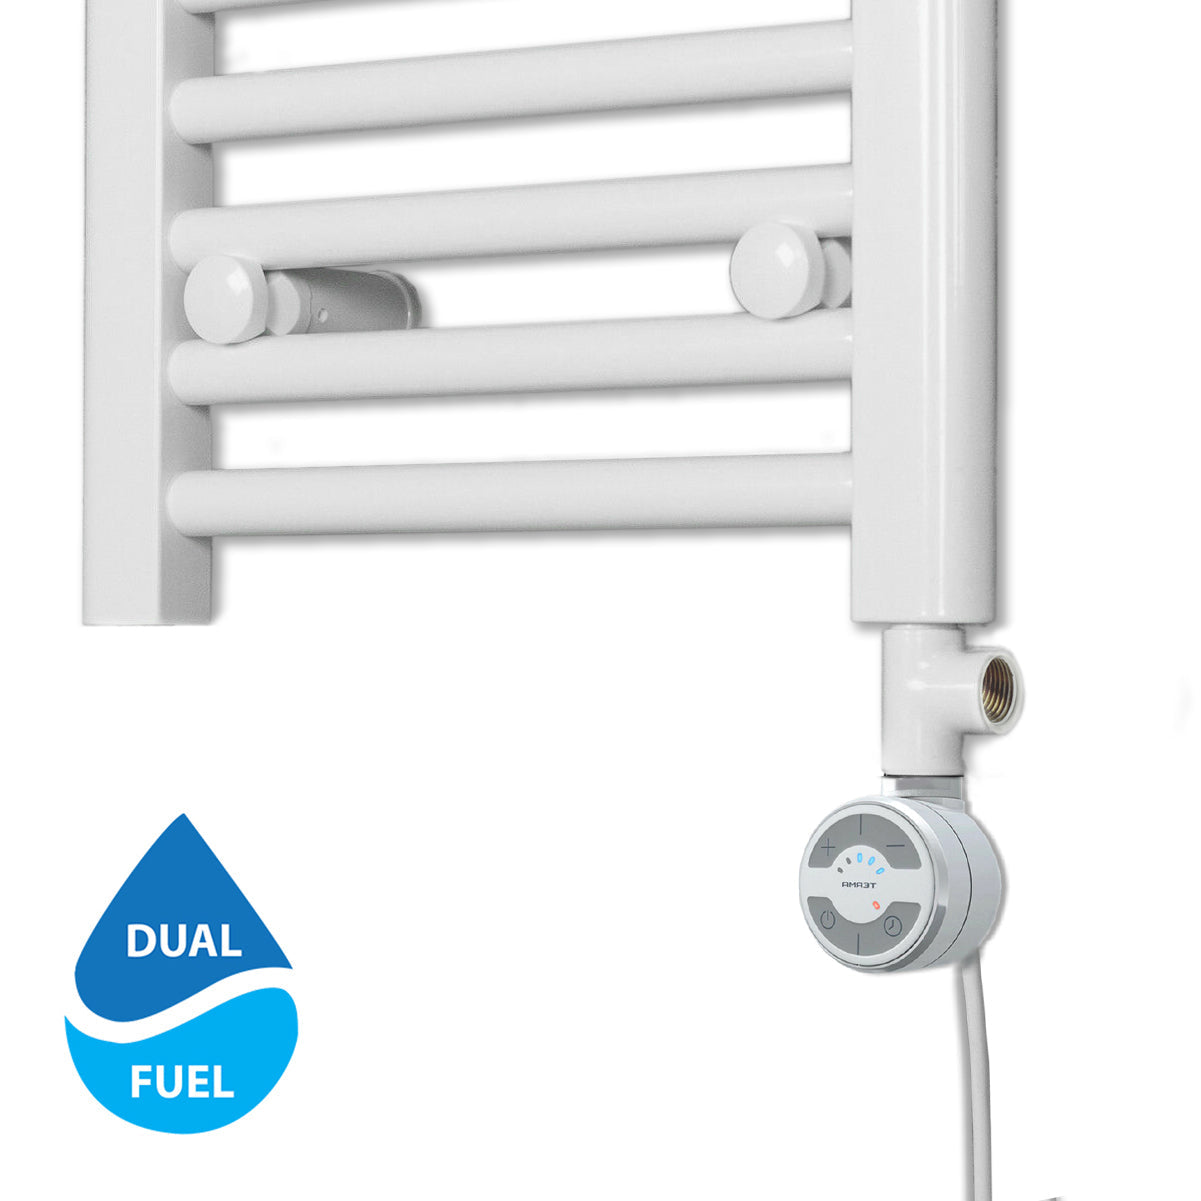 Terma MOA Thermostatic Electric Element for Heated Towel Rail Radiator White Conversion Kit With T-Pieces